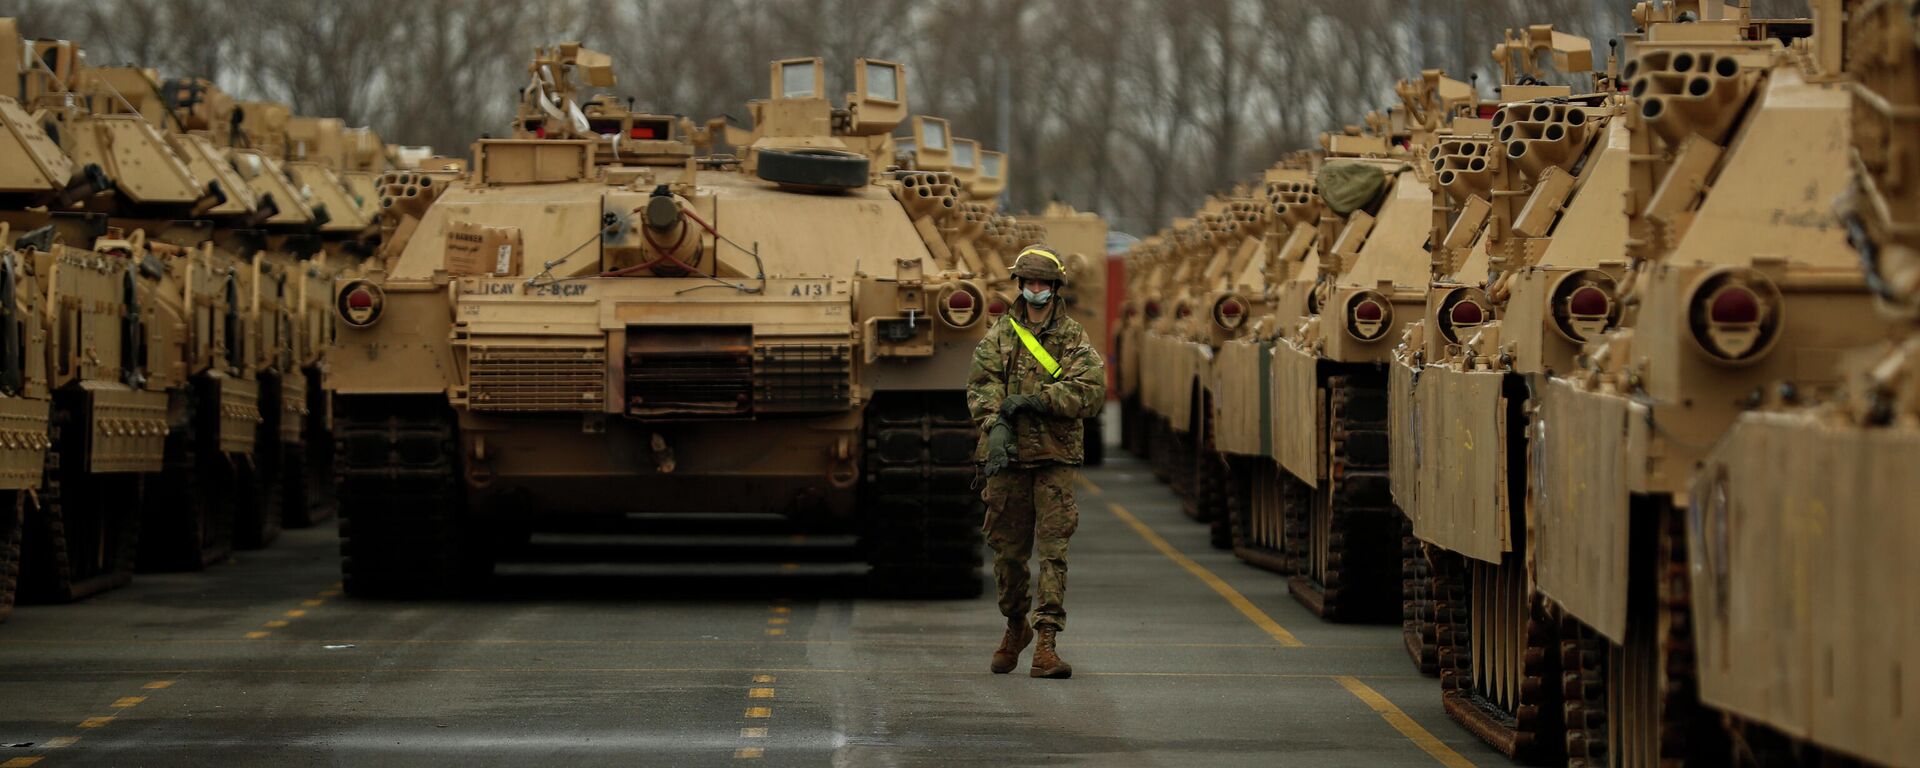 A U.S. soldier walks past parked armoured vehicles and tanks of the 1st Armored Brigade Combat Team and 1st Calvary Division, based out of Fort Hood, Texas, as they are unloaded at the port of Antwerp, Belgium, Monday, Nov. 16, 2020. The U.S. military vehicles are on their way to Eastern Europe to take part in the Atlantic Resolve military exercises, in which American troops train together with NATO partners to help ensure stability in Europe. - Sputnik International, 1920, 09.01.2022